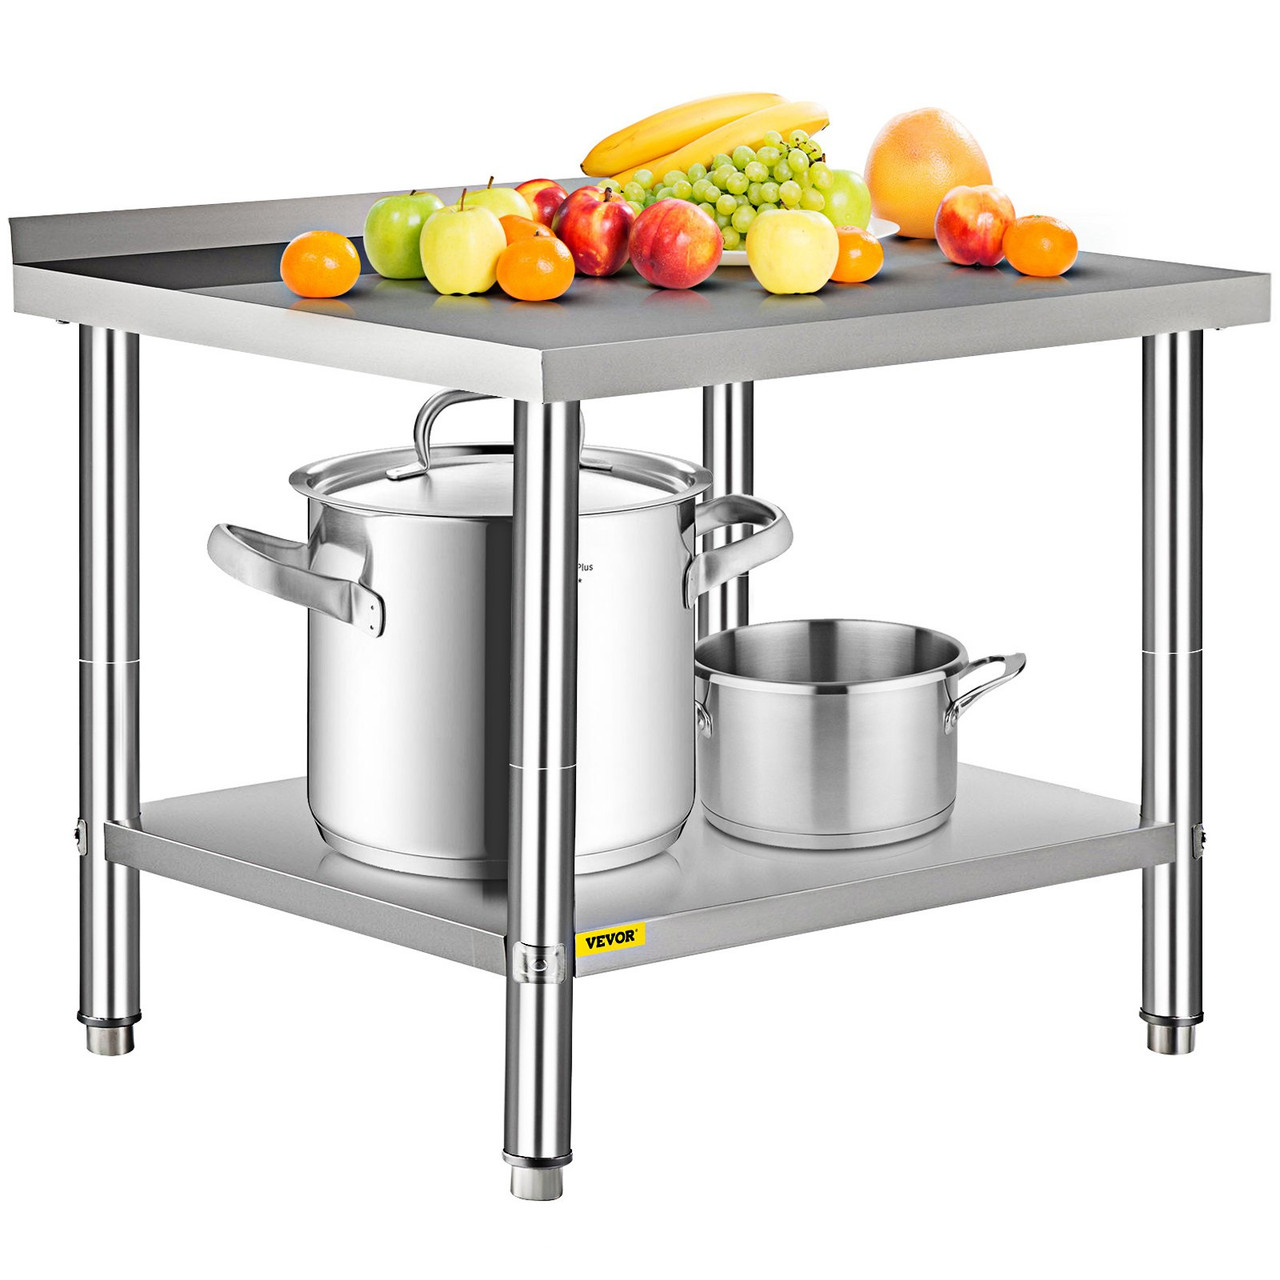 Stainless Steel Prep Table, 36 x 24 x 35 Inch, 440lbs Load Capacity Heavy Duty Metal Worktable with Backsplash and Adjustable Undershelf, Commercial Workstation for Kitchen Restaurant